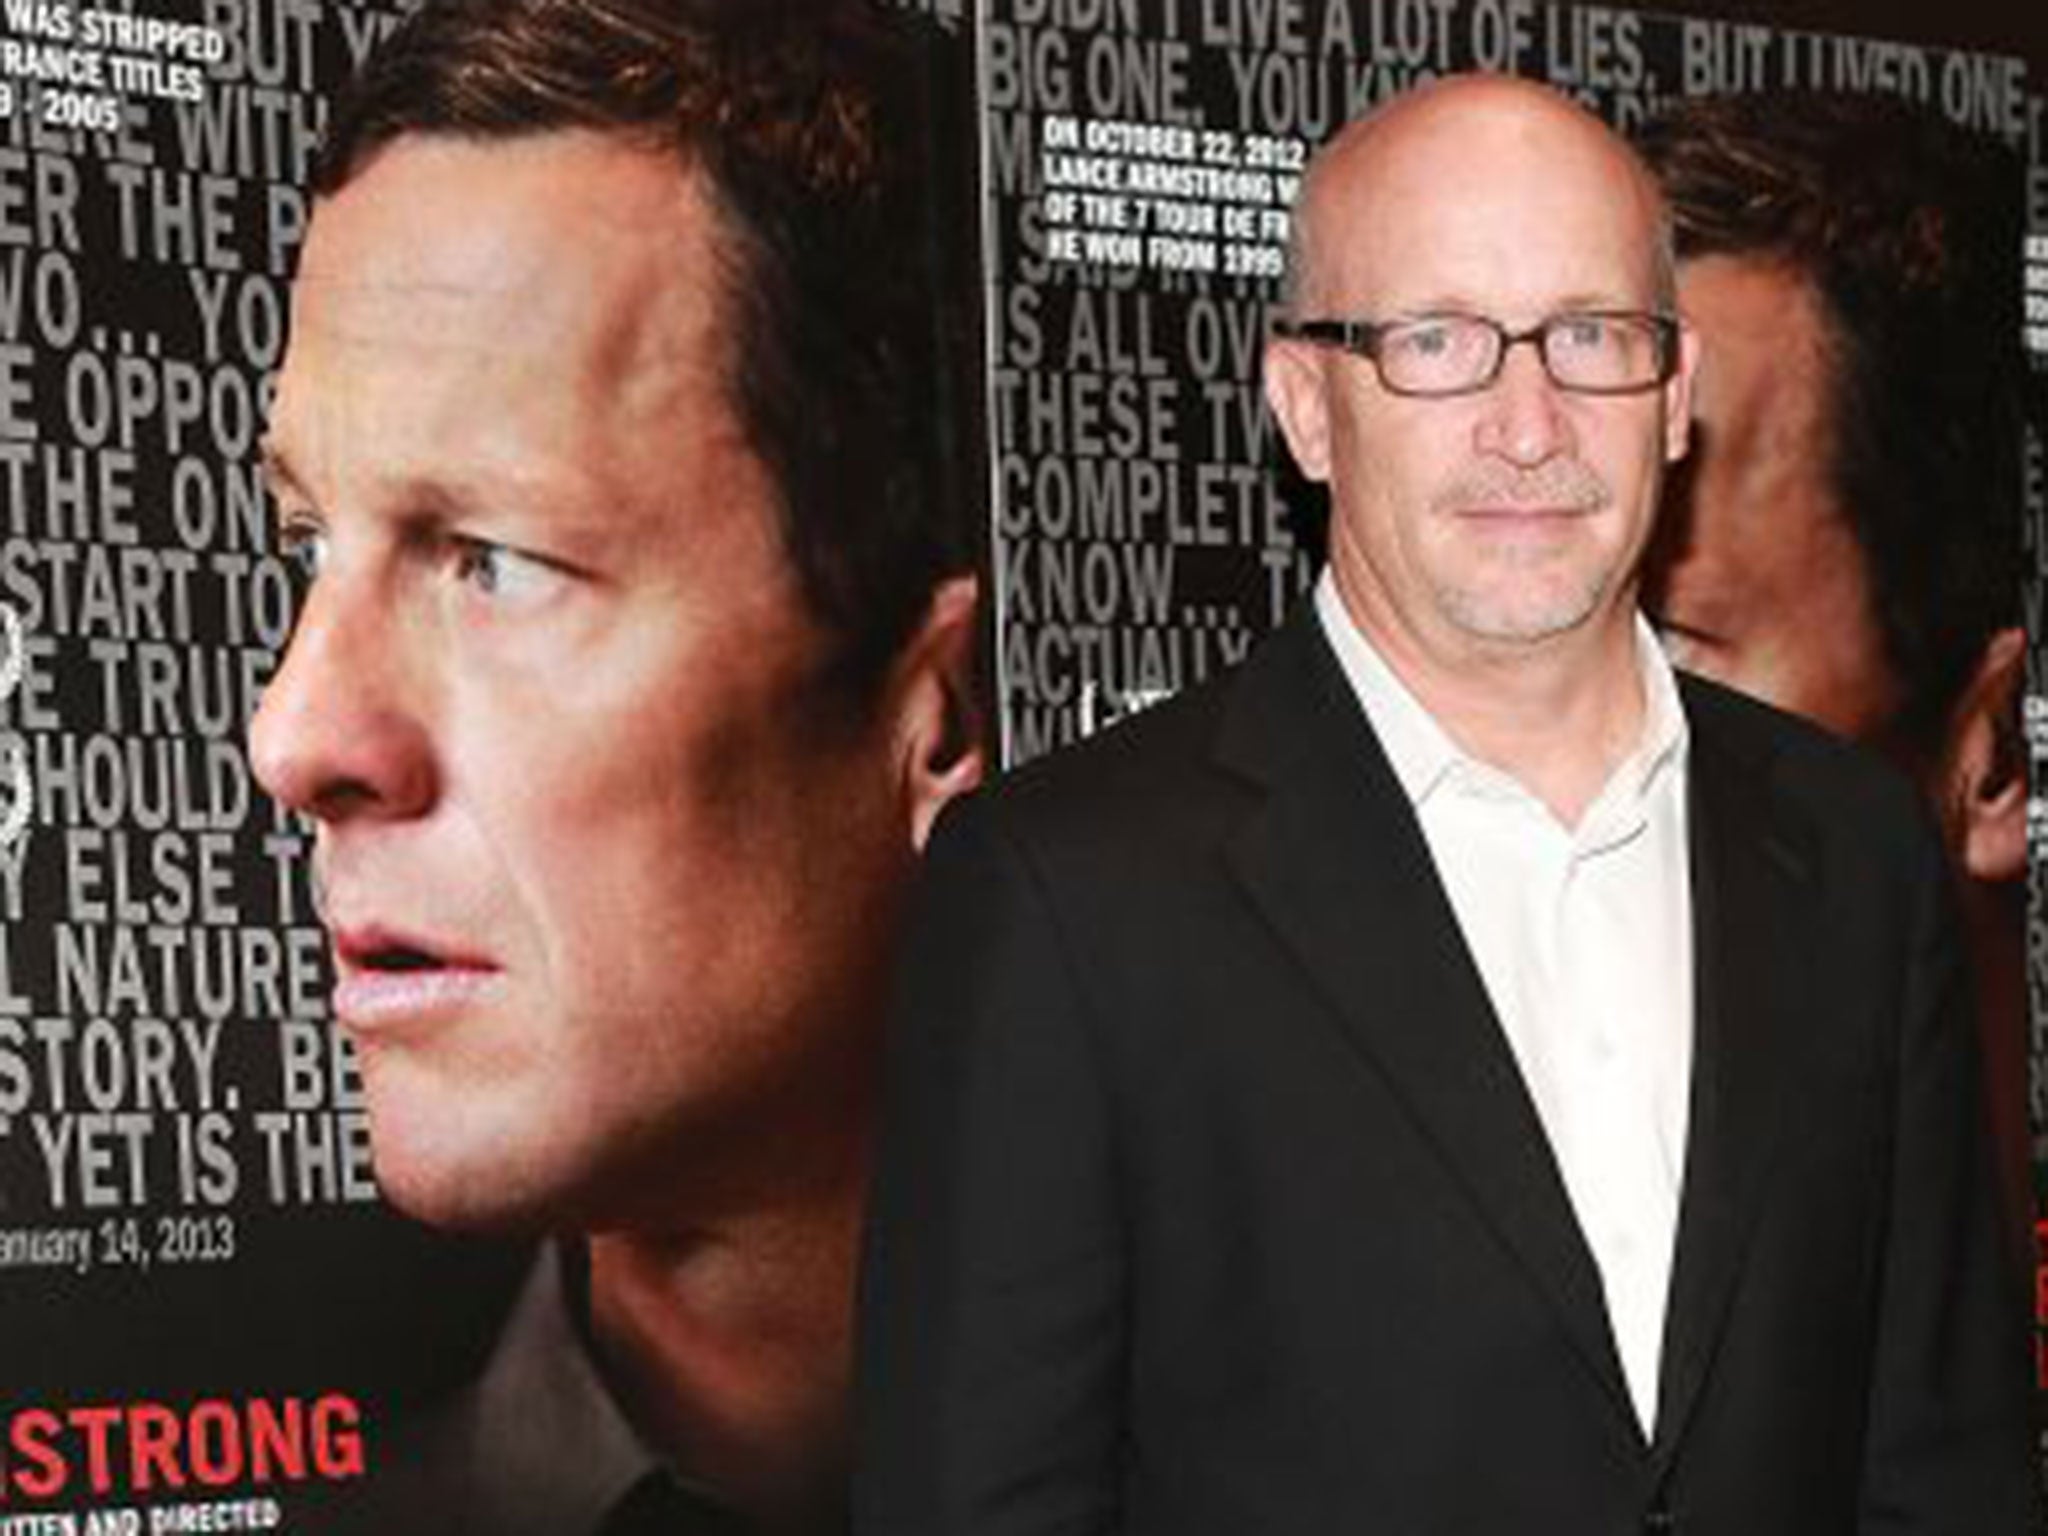 Alex Gibney with posters for ‘The Armstrong Lie’